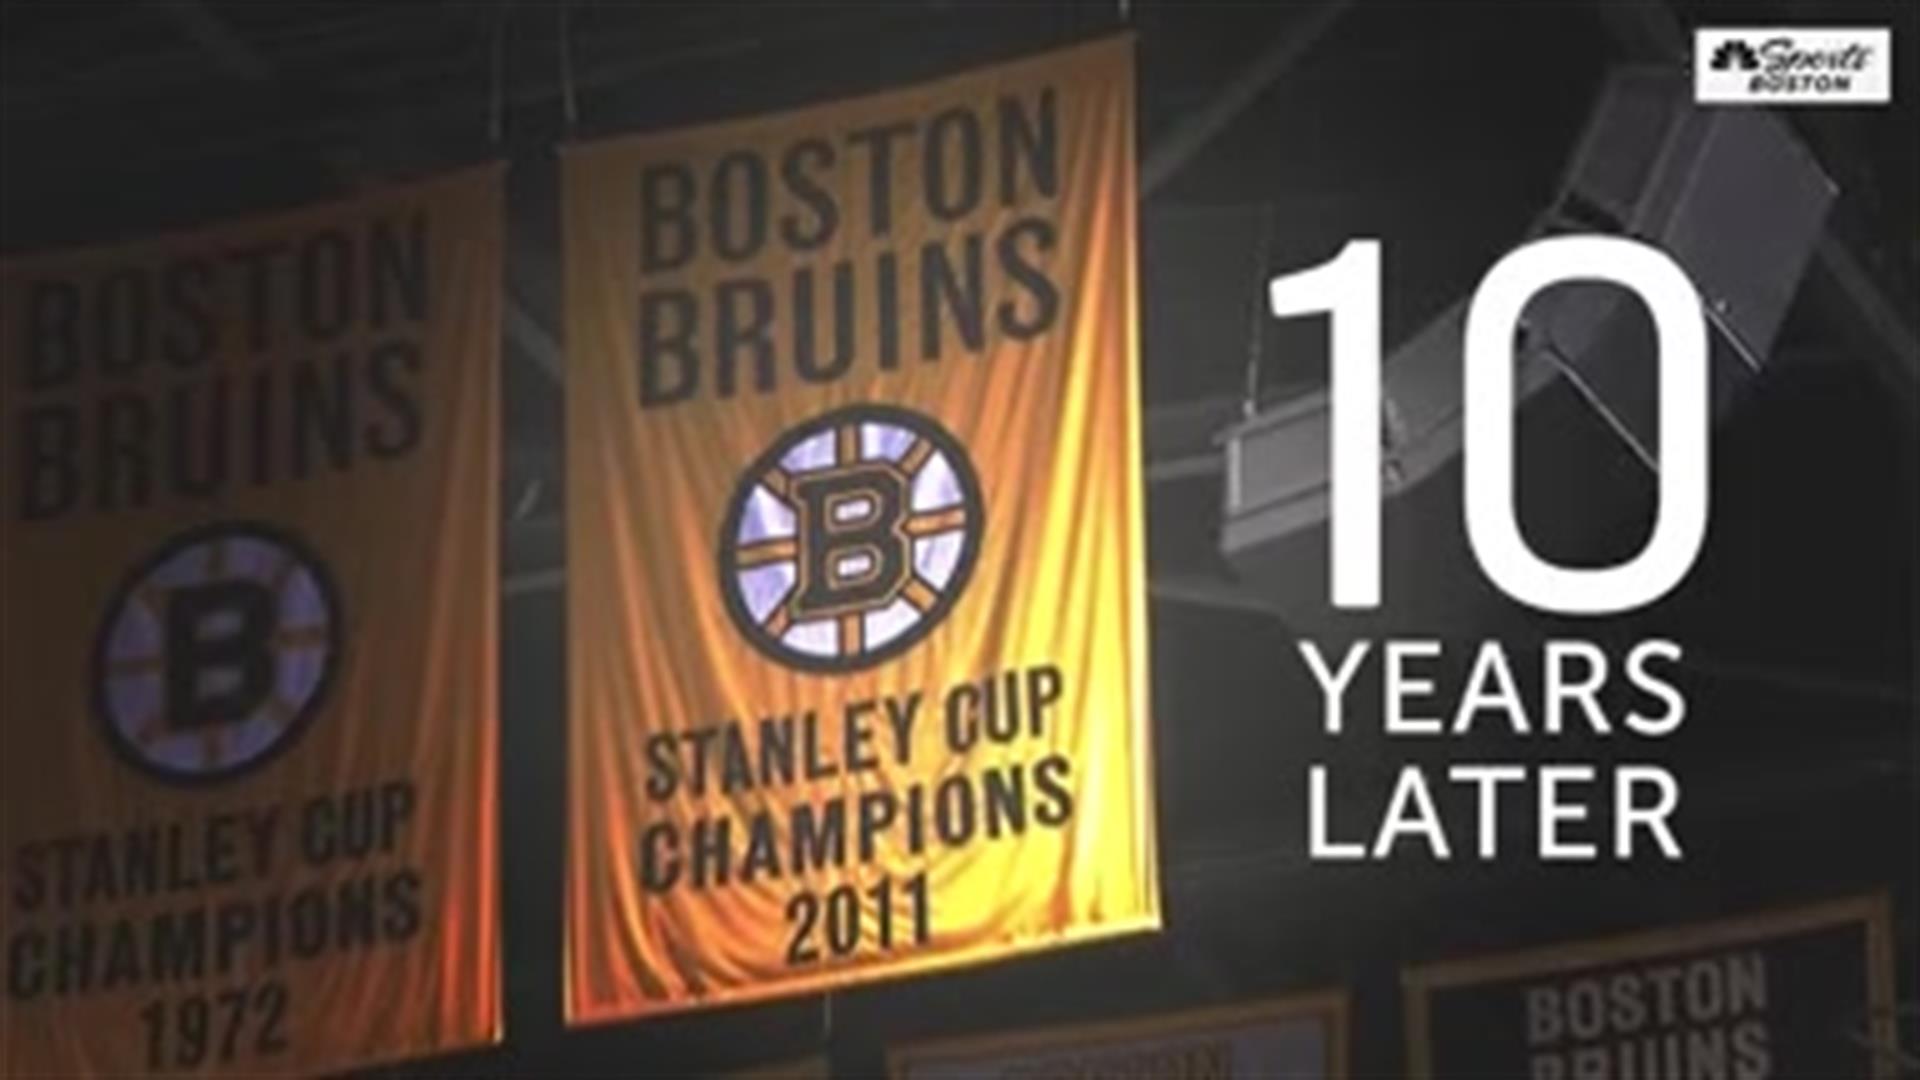 June 15, 2011: 39-Year Boston Bruins Stanley Cup Drought Ends